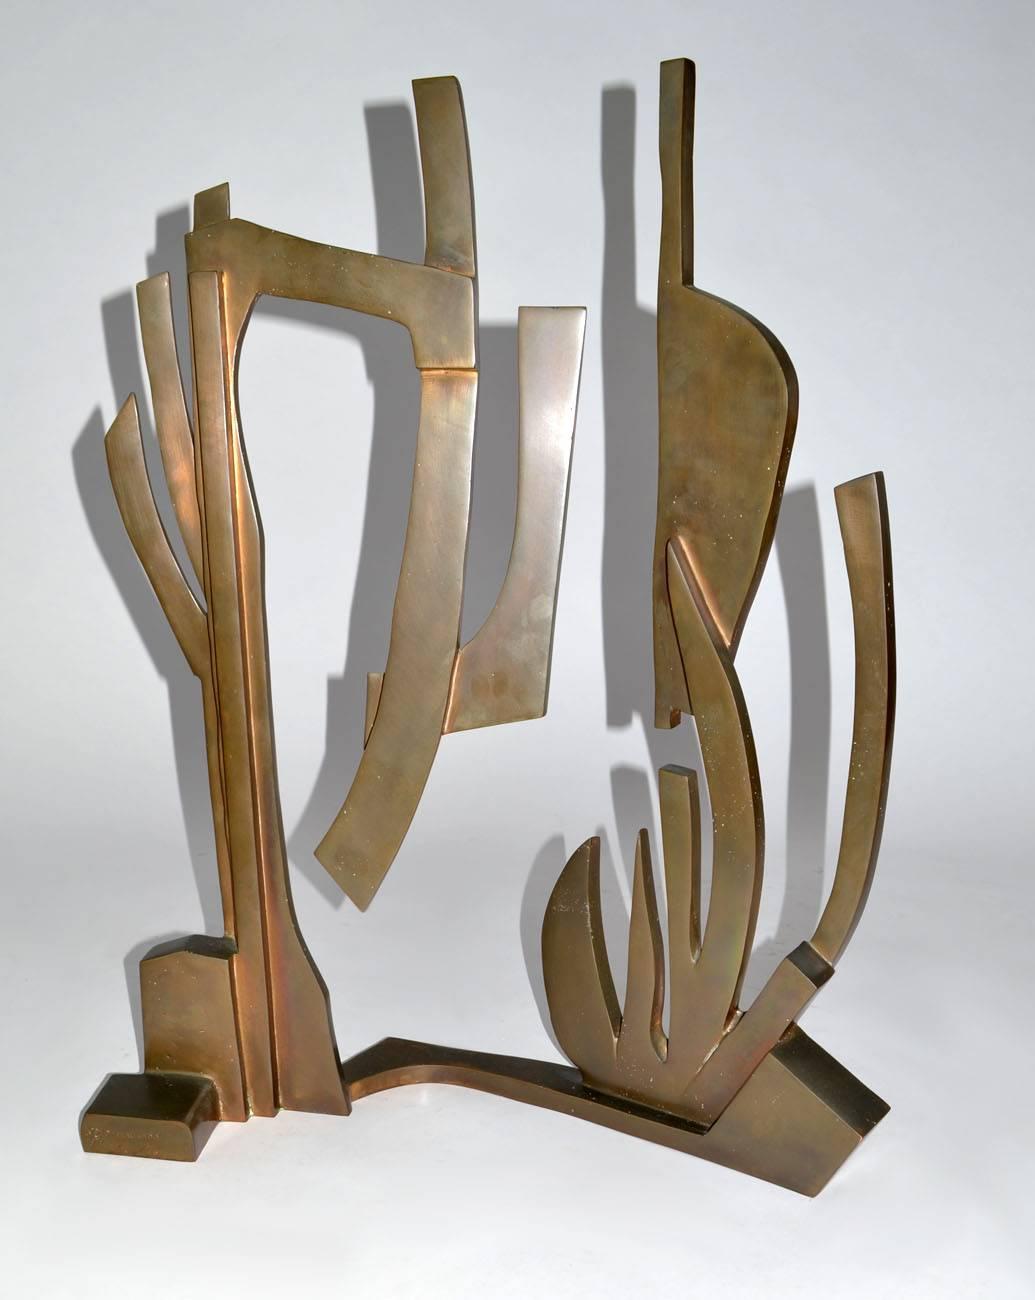 Modern abstract bronze sculpture by Oded Halahmy, New York, 1977. Heavy well-proportioned. Nice original patina and character. Signed and dated to base '1977' Edition 5/5.
Oded Halahmy was born in Iraq, moved with his family to Israel in the 1950s,